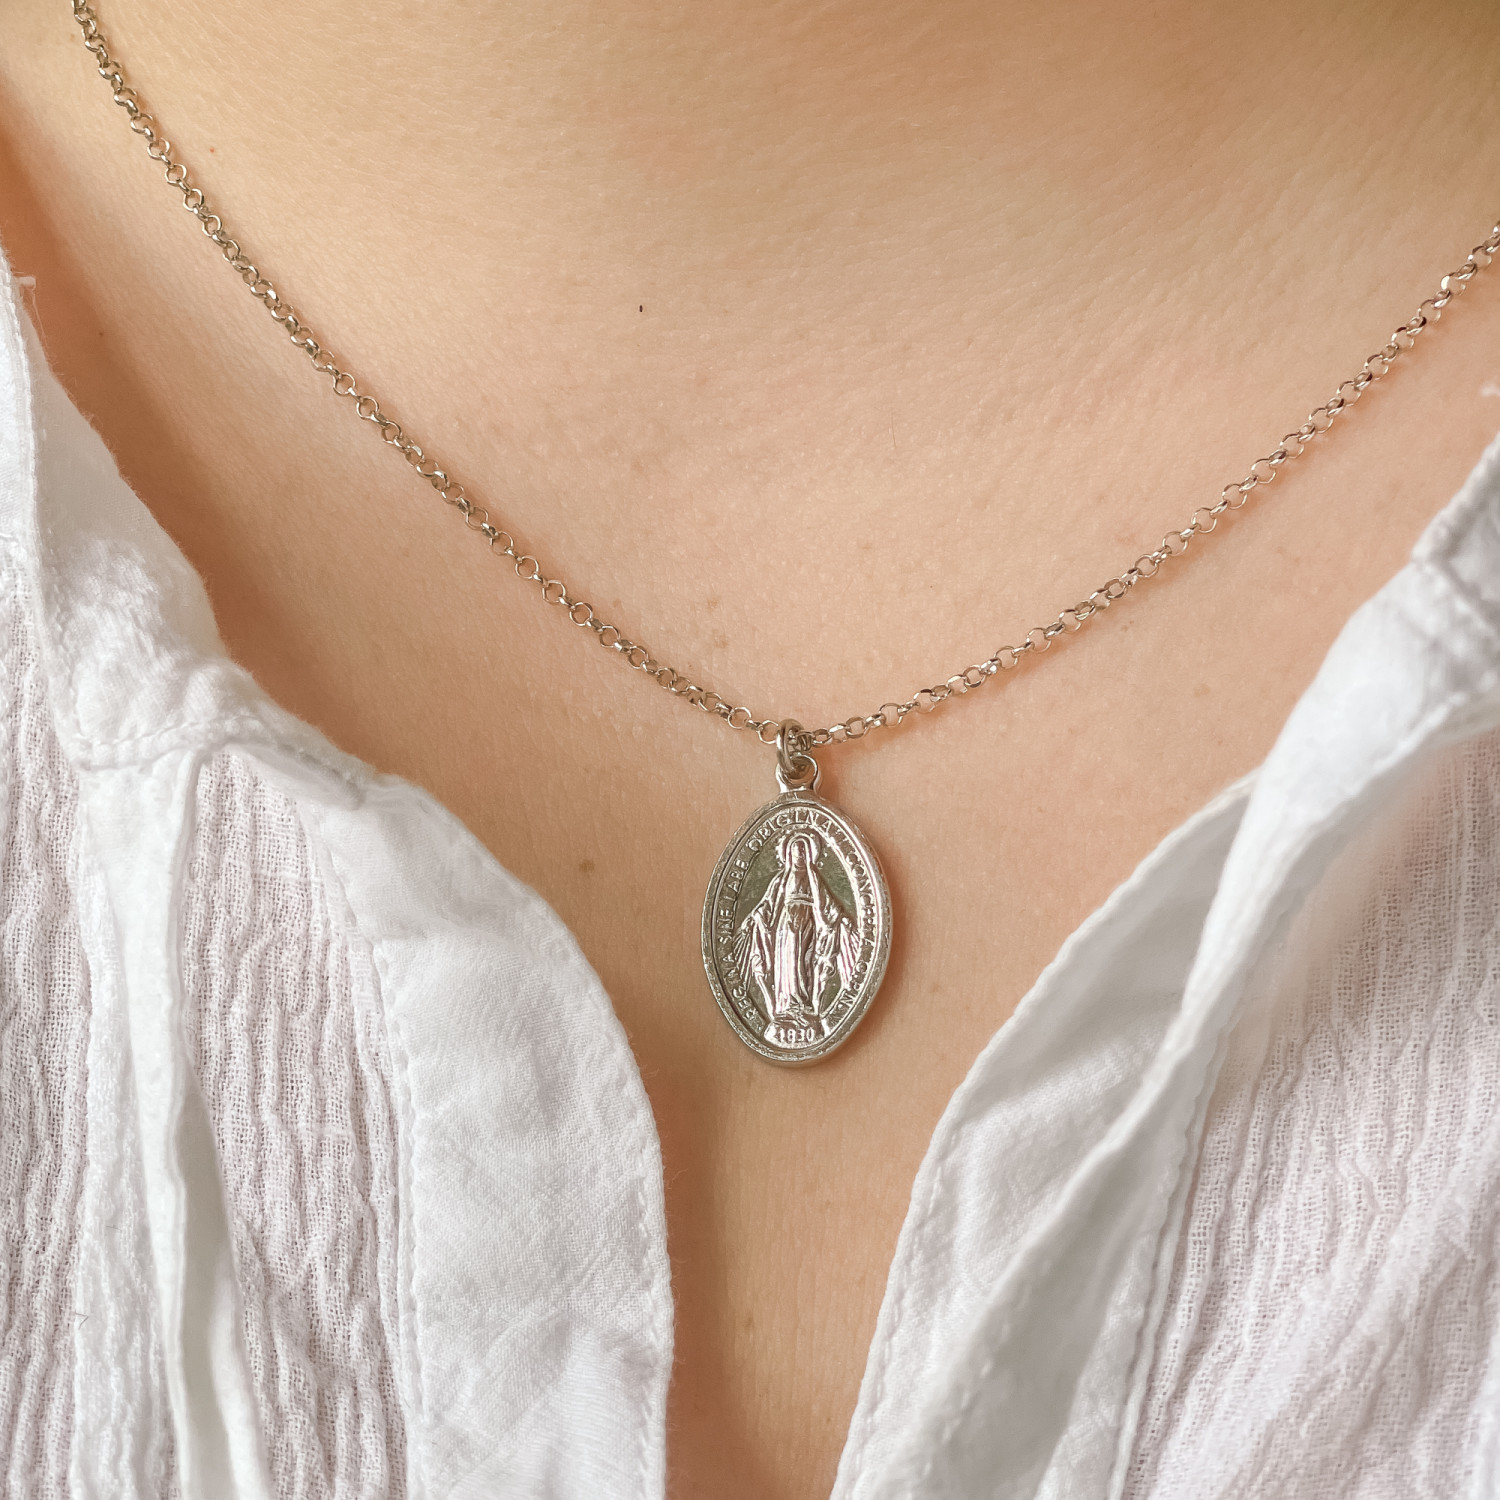 Miraculous Medal Necklace, Miraculous Medal Jewelry